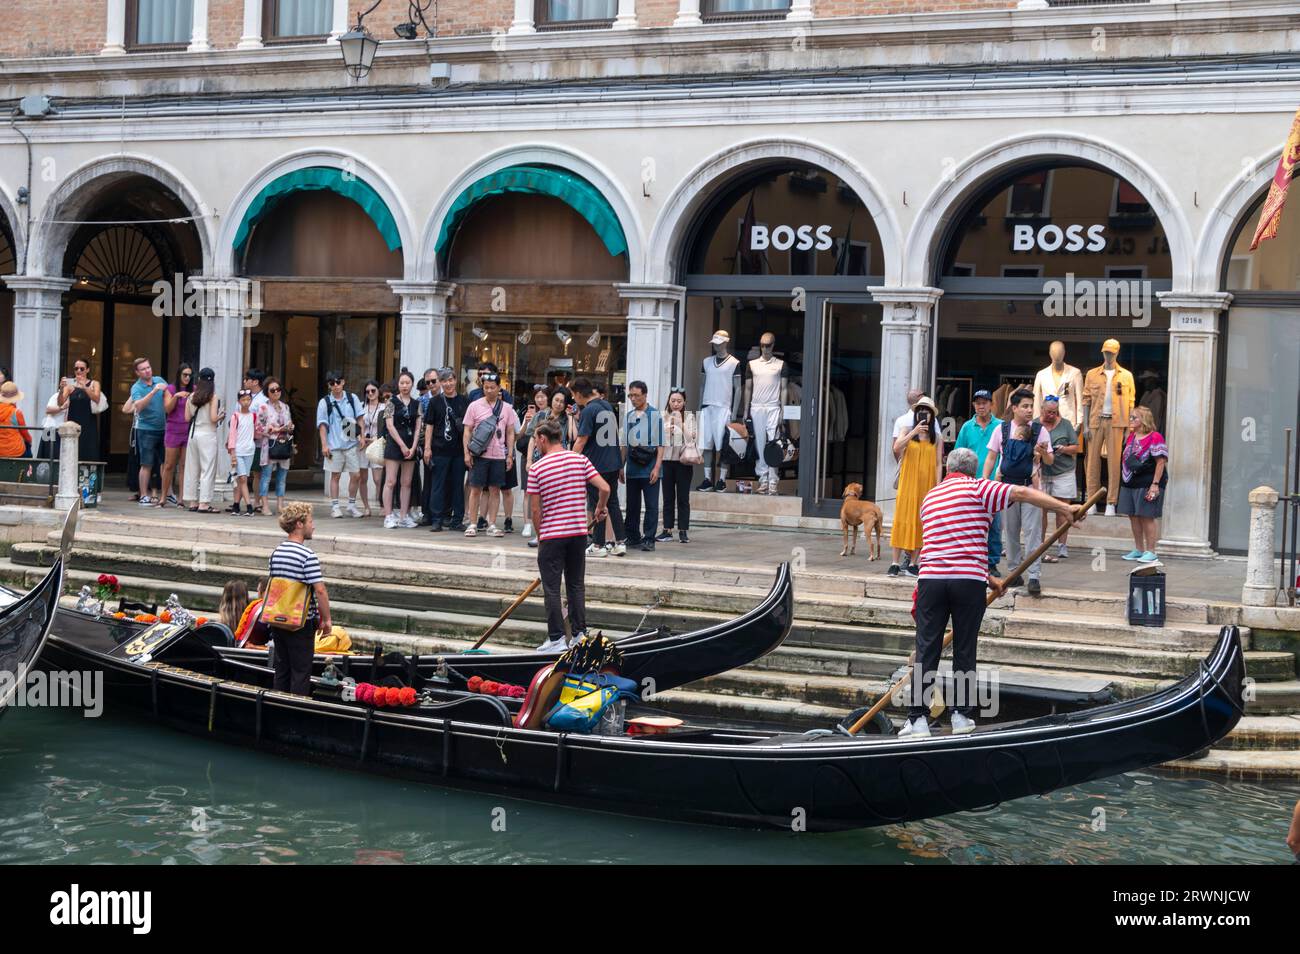 A queue of tourists wait to board their gondolas for a tour at one of the official gondola stations based on the canals of Venice in the Veneto region Stock Photo